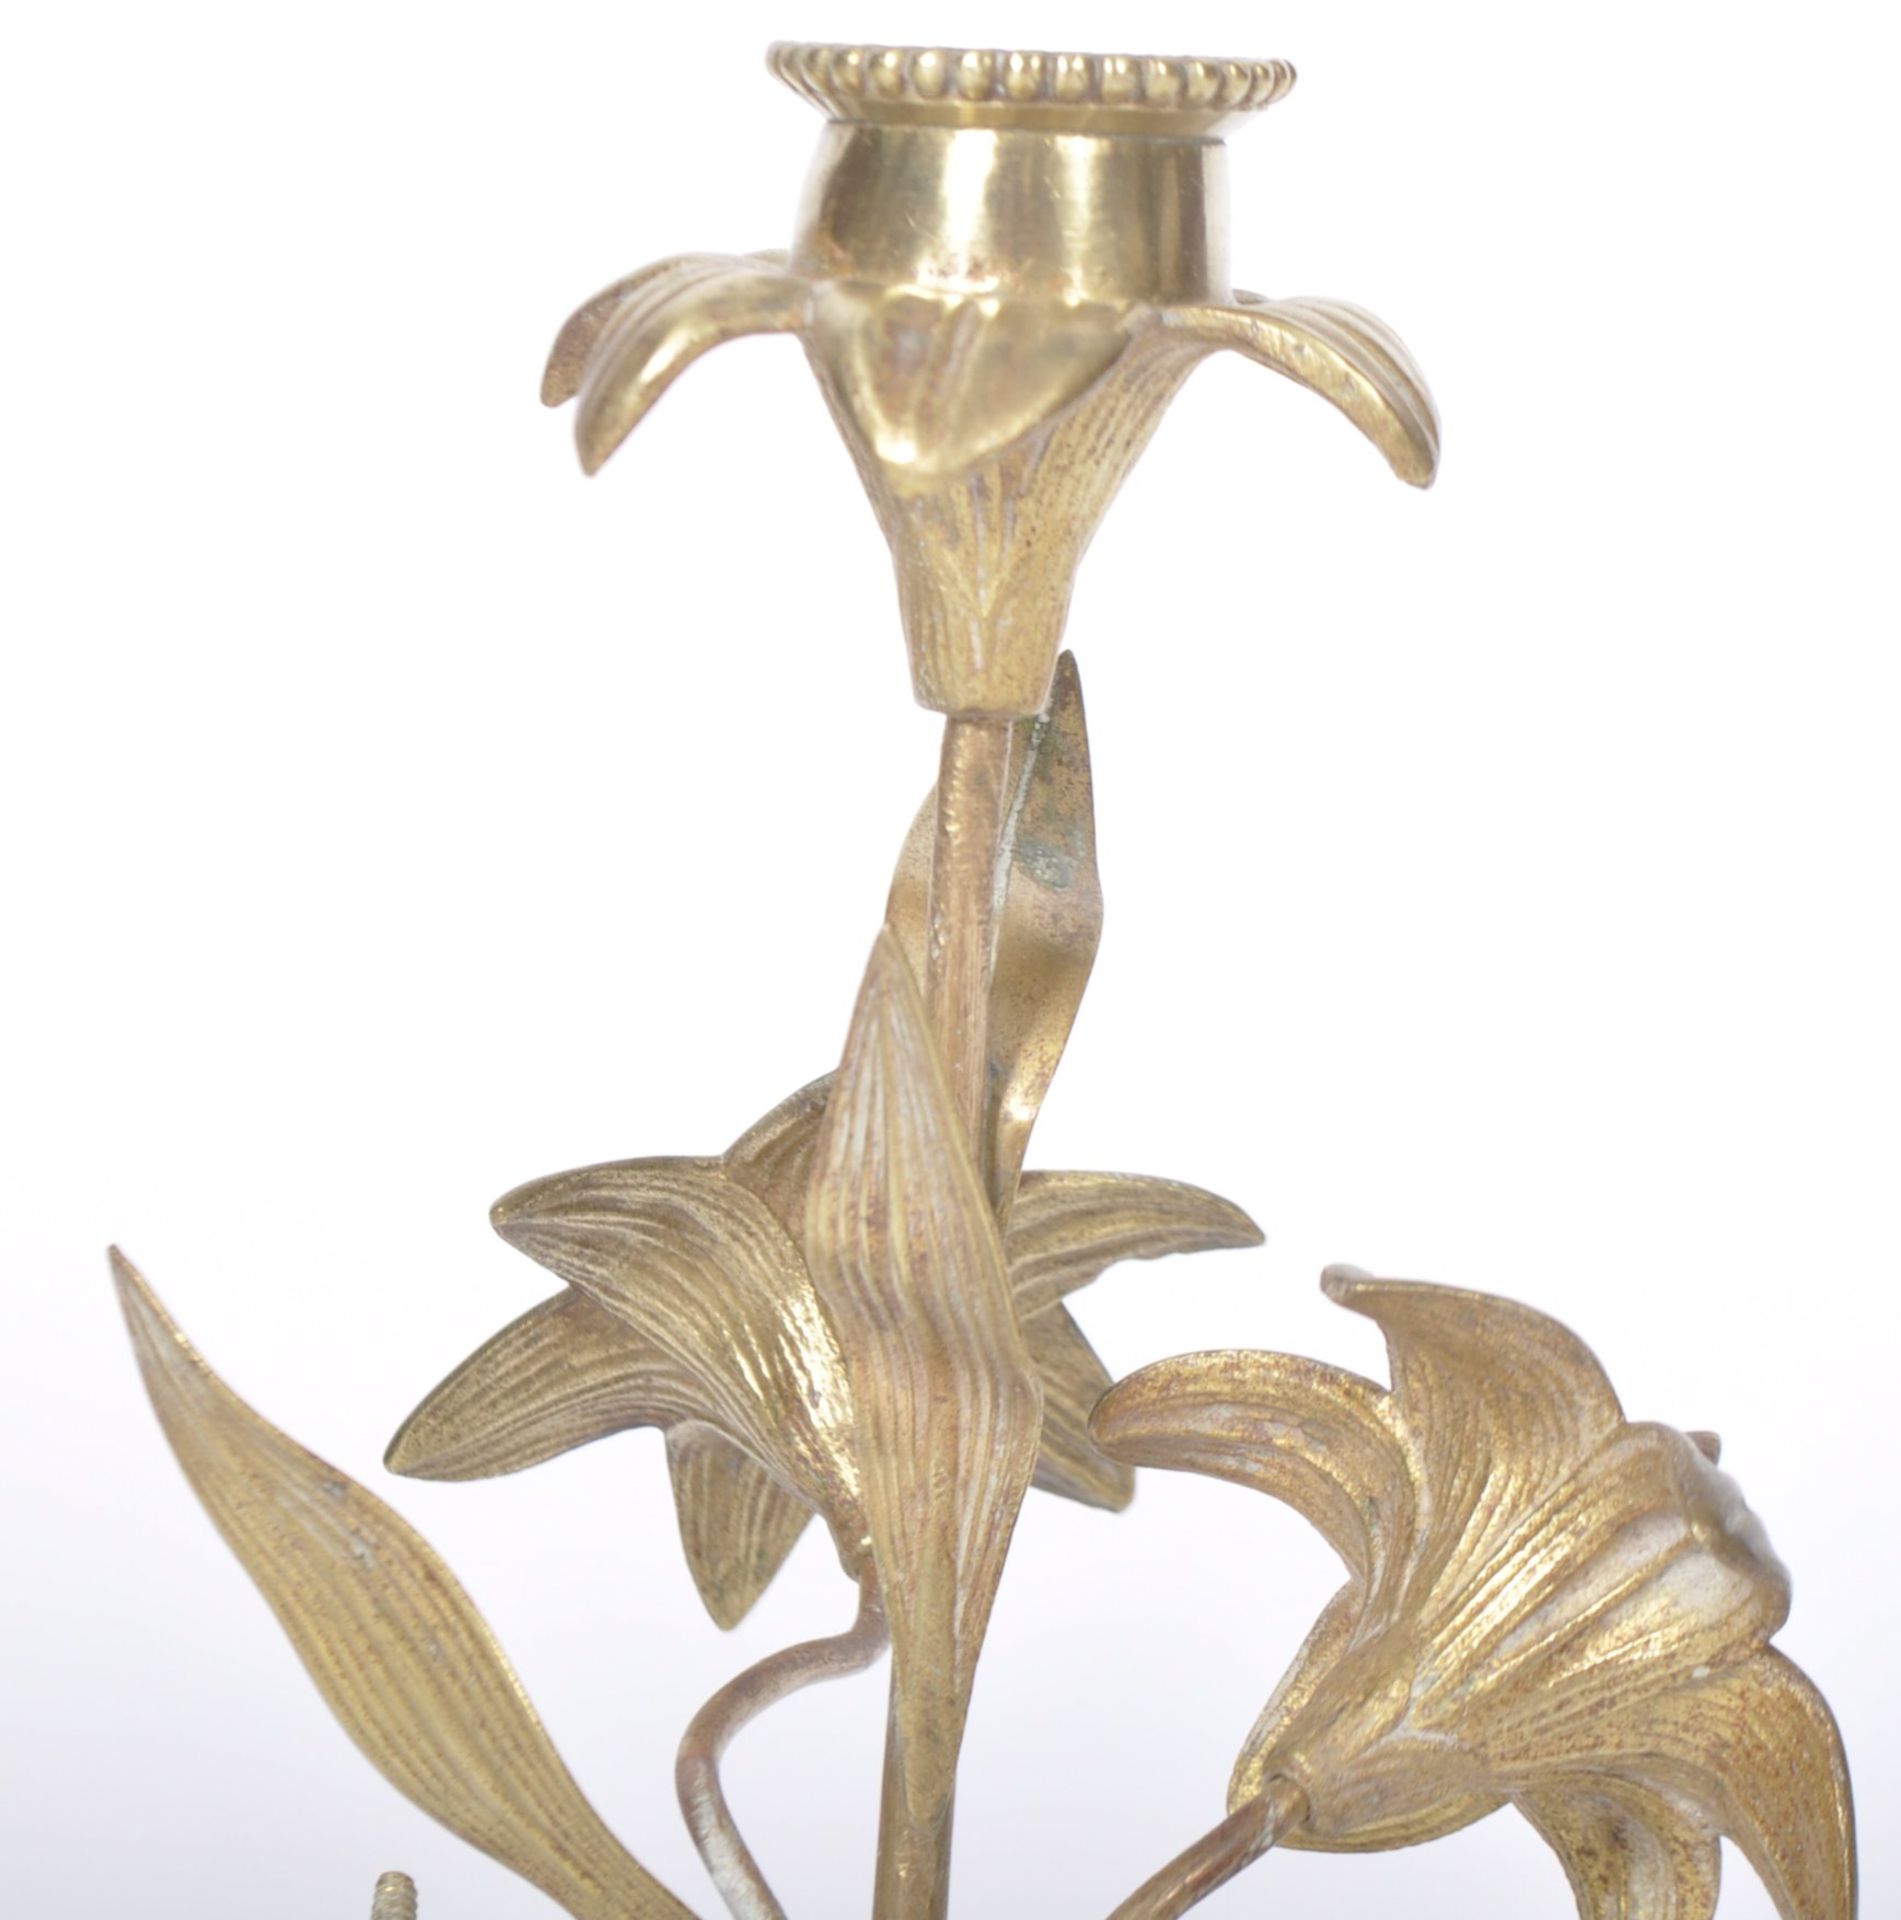 MATCHING PAIR OF 19TH CENTURY FRENCH BRASS CANDLESTICKS - Image 5 of 7